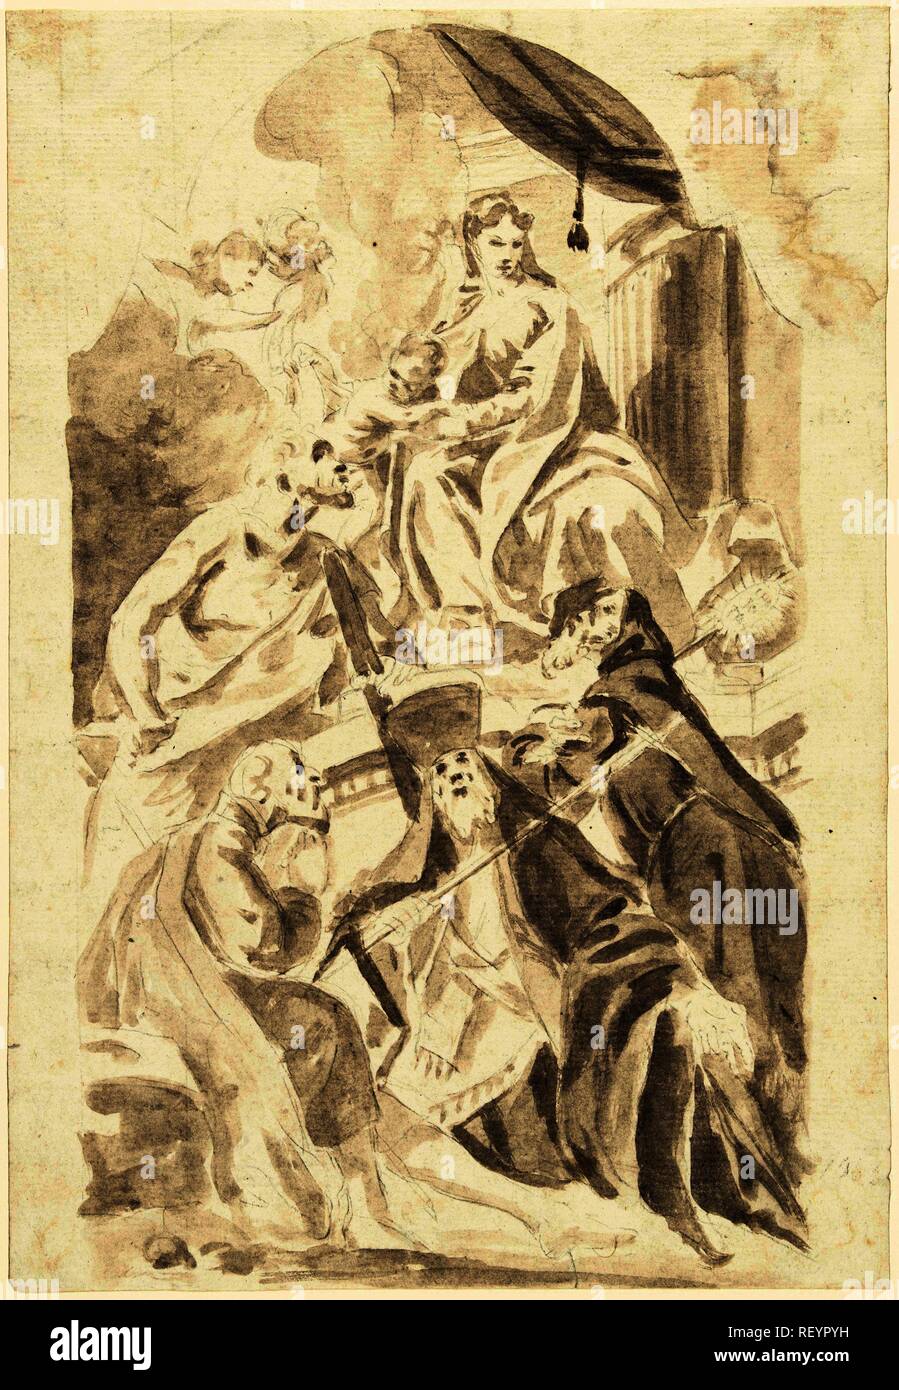 Mary with child on a high throne, various male saints at her feet. Draughtsman: anonymous. Dating: 1700 - 1800. Measurements: h 305 mm × w 209 mm. Museum: Rijksmuseum, Amsterdam. Stock Photo